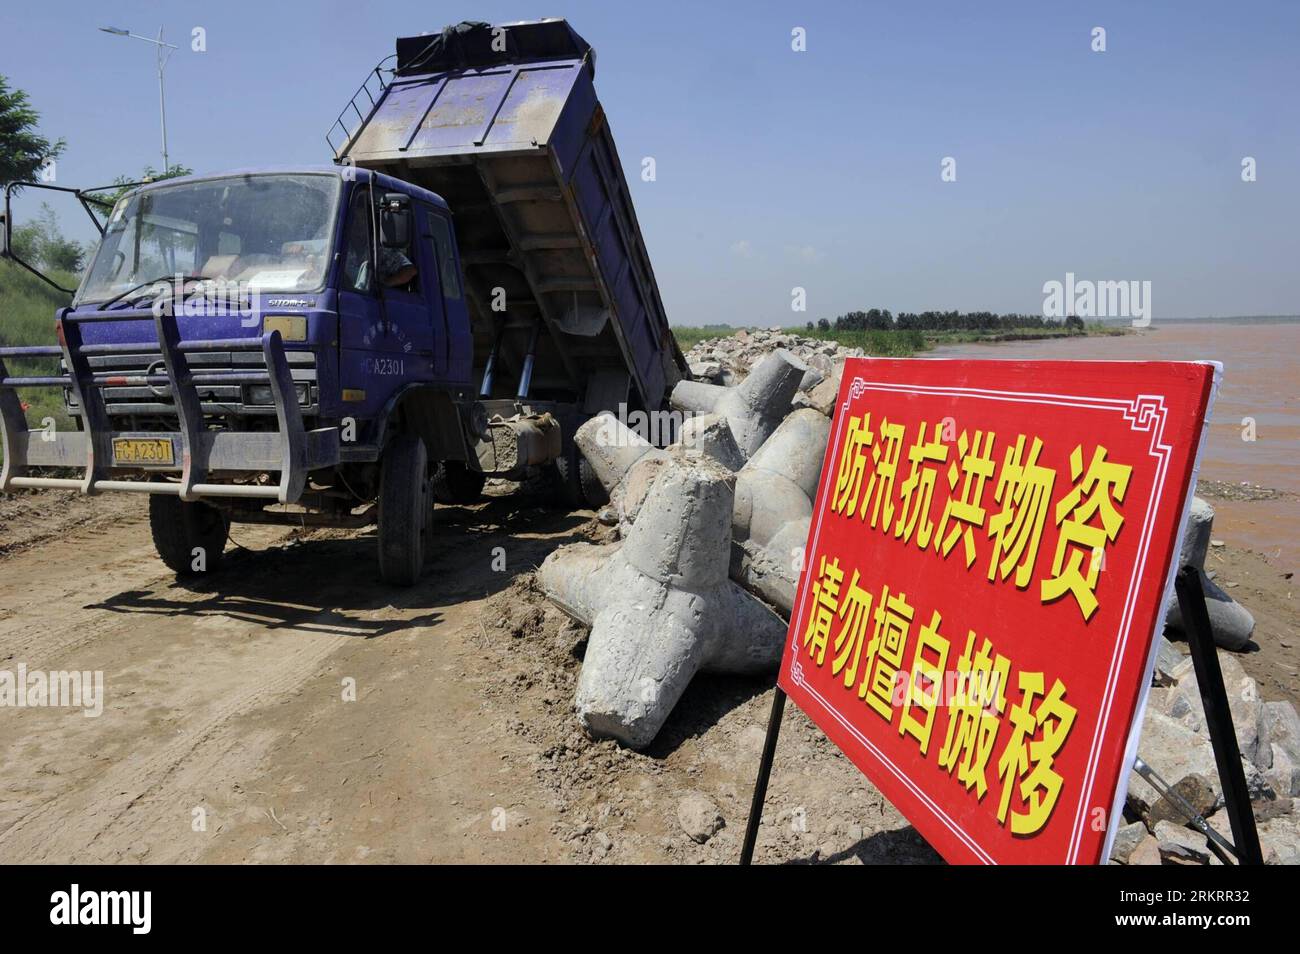 Bildnummer: 58298540  Datum: 01.08.2012  Copyright: imago/Xinhua (120801) -- YINCHUAN, Aug. 1, 2012 (Xinhua) -- A vehicle unloads stones to reinforce embankment in the Luojiahu section of the Yellow River in northwest China s Ningxia Hui Autonomous Region, Aug. 1, 2012. The highest flood peak of the Yellow River since 1989 hit the Ningxia section on Tuesday. Local flood control headquarters has initiated a level-three emergency response to cope with possible flooding. (Xinhua/Wang Peng)(mcg) CHINA-NINGXIA-FLOOD PEAK (CN) PUBLICATIONxNOTxINxCHN Gesellschaft Hochwasser Gelber Fluss Huanghe Vorbe Stock Photo